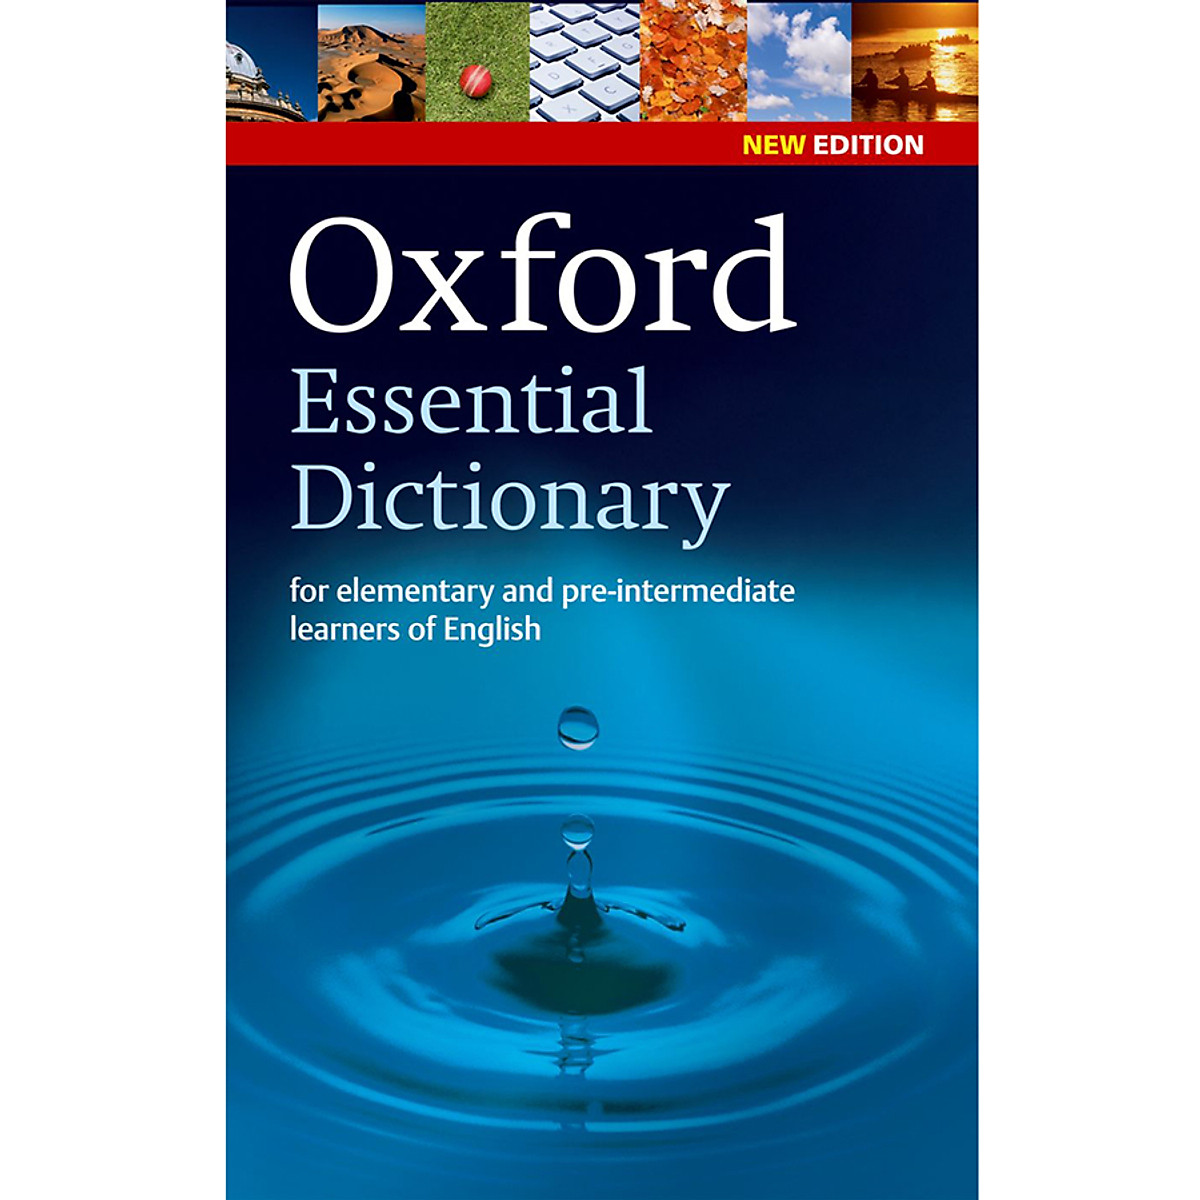 Oxford Essential Dictionary (New Edition)